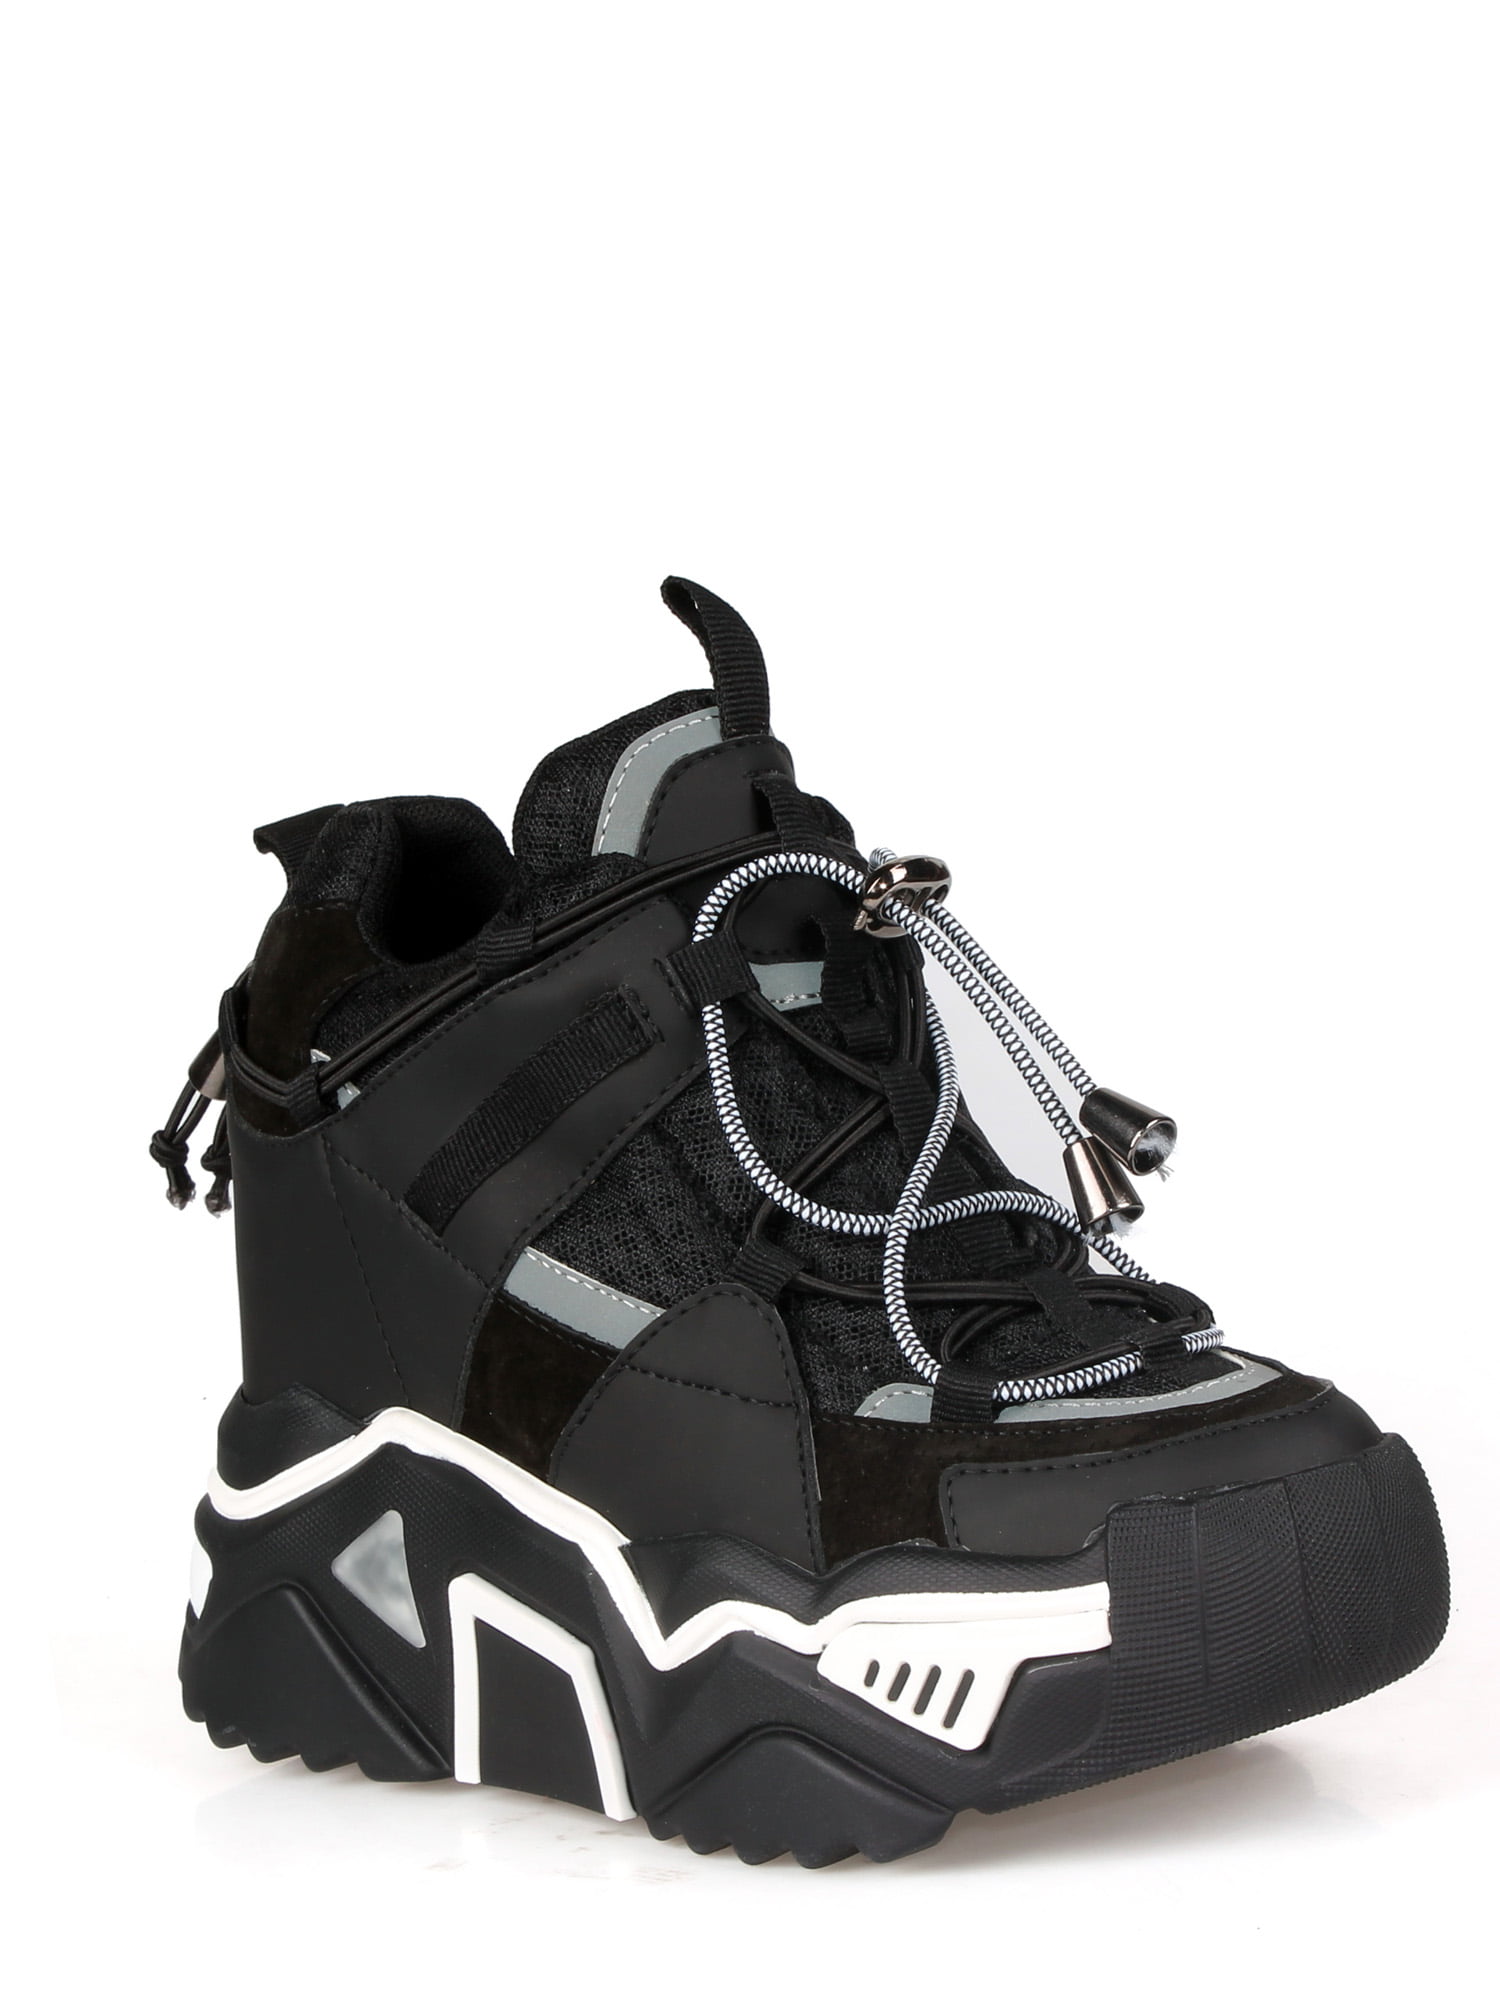 Anthony Wang - Anthony Wang Women's Platform Wedge Sneakers in Black ...